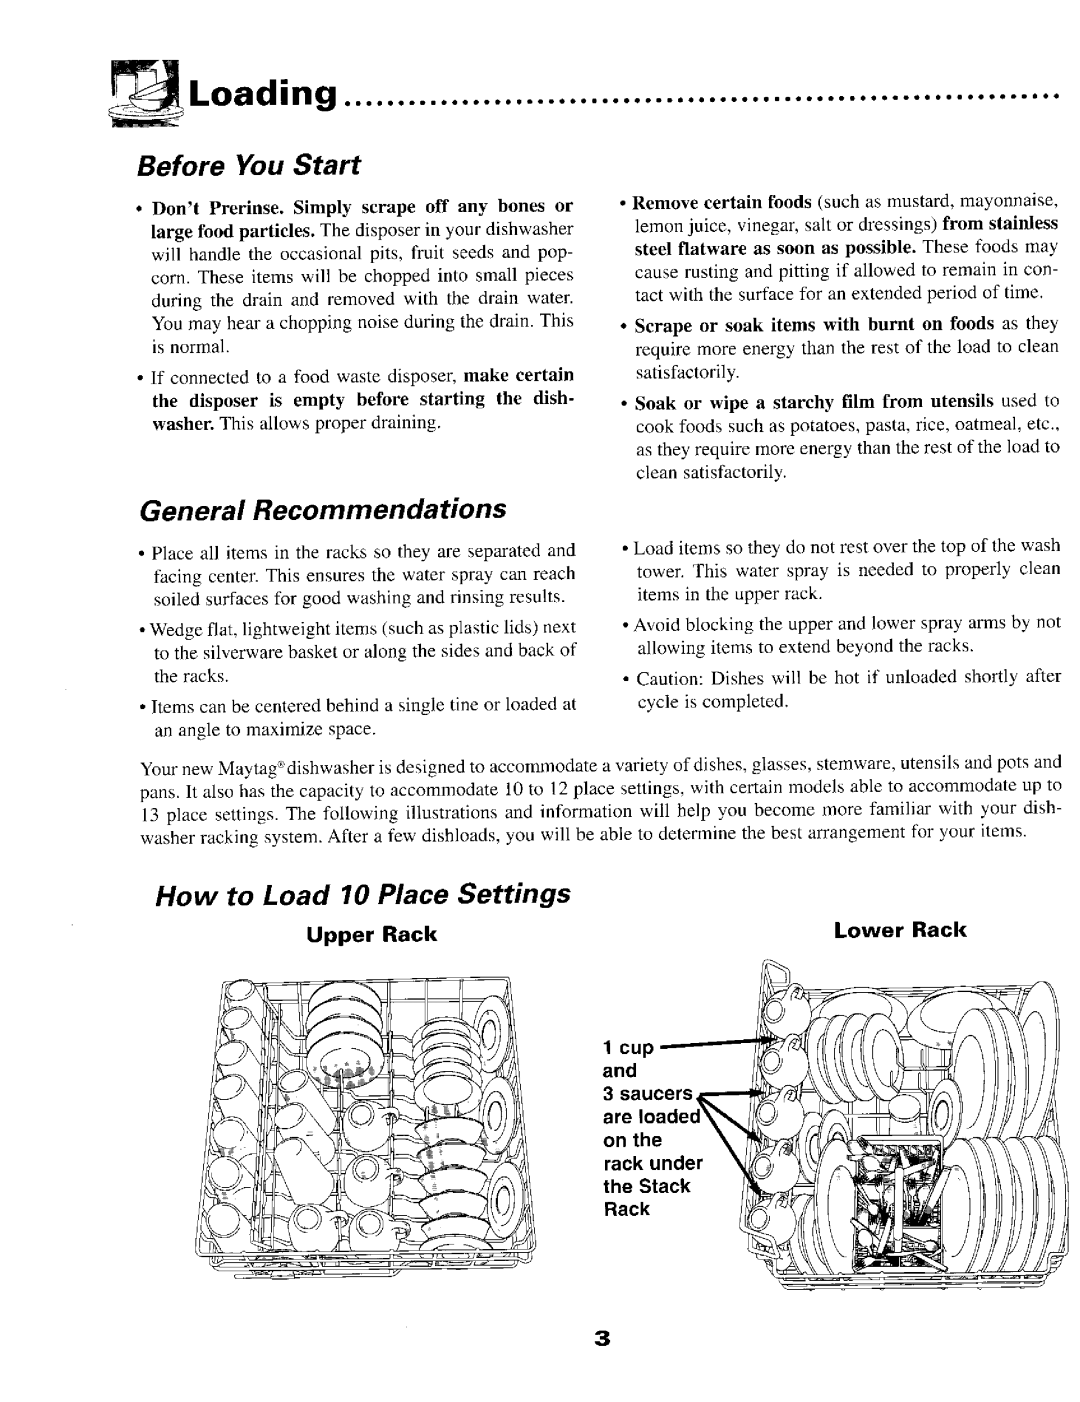 Maytag 9922 Loading, Before You Start, General Recommendations, How to Load 10 Place Settings, Upper Rack, Lower Rack 